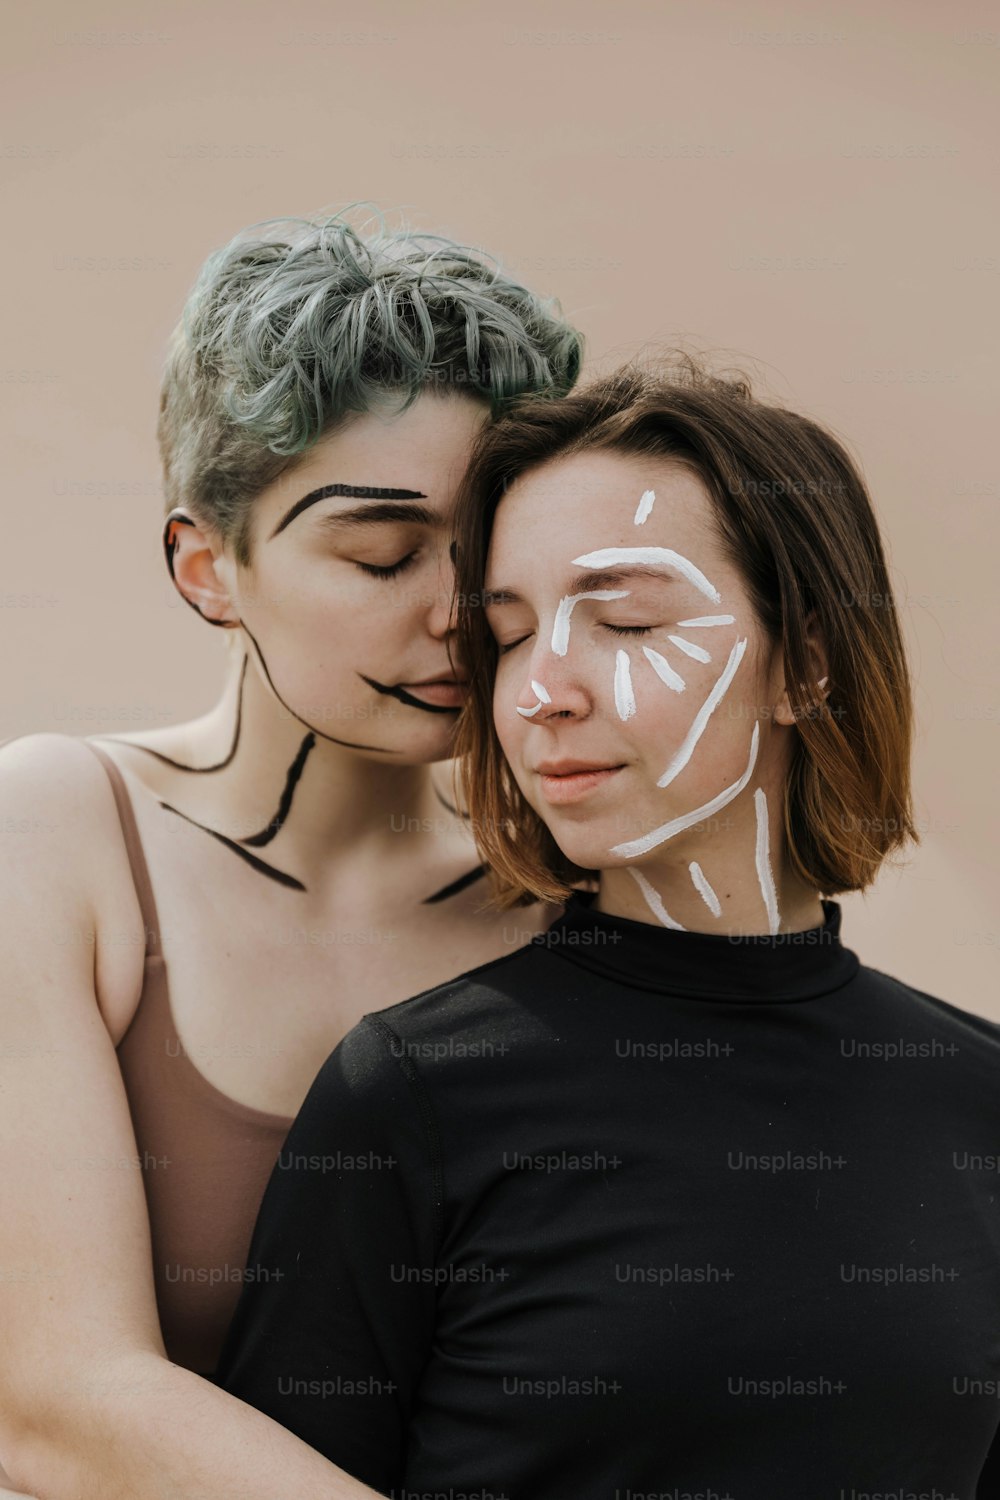 two women with painted faces hugging each other